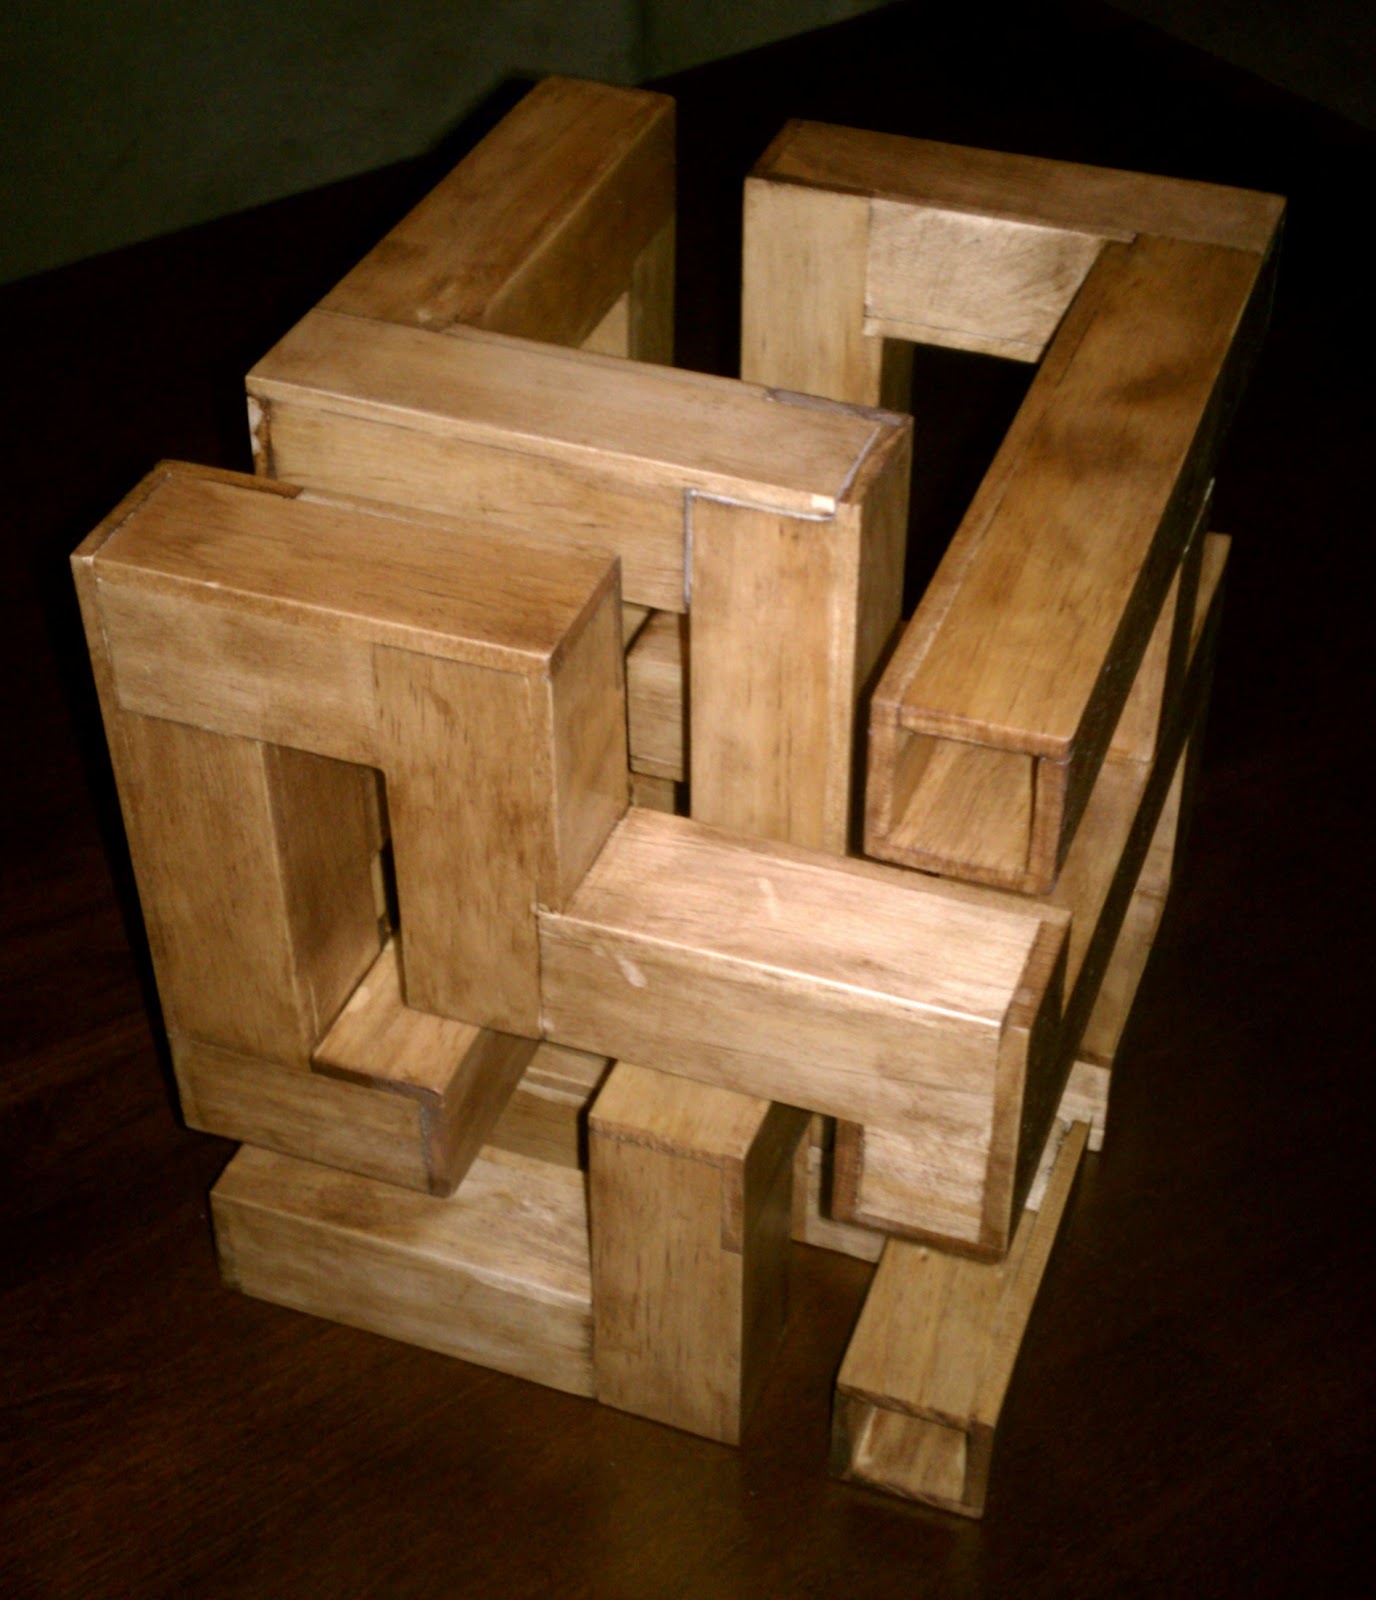 Trash Can Shed Plan: How To Make A Wooden Puzzle Box Wooden Plans